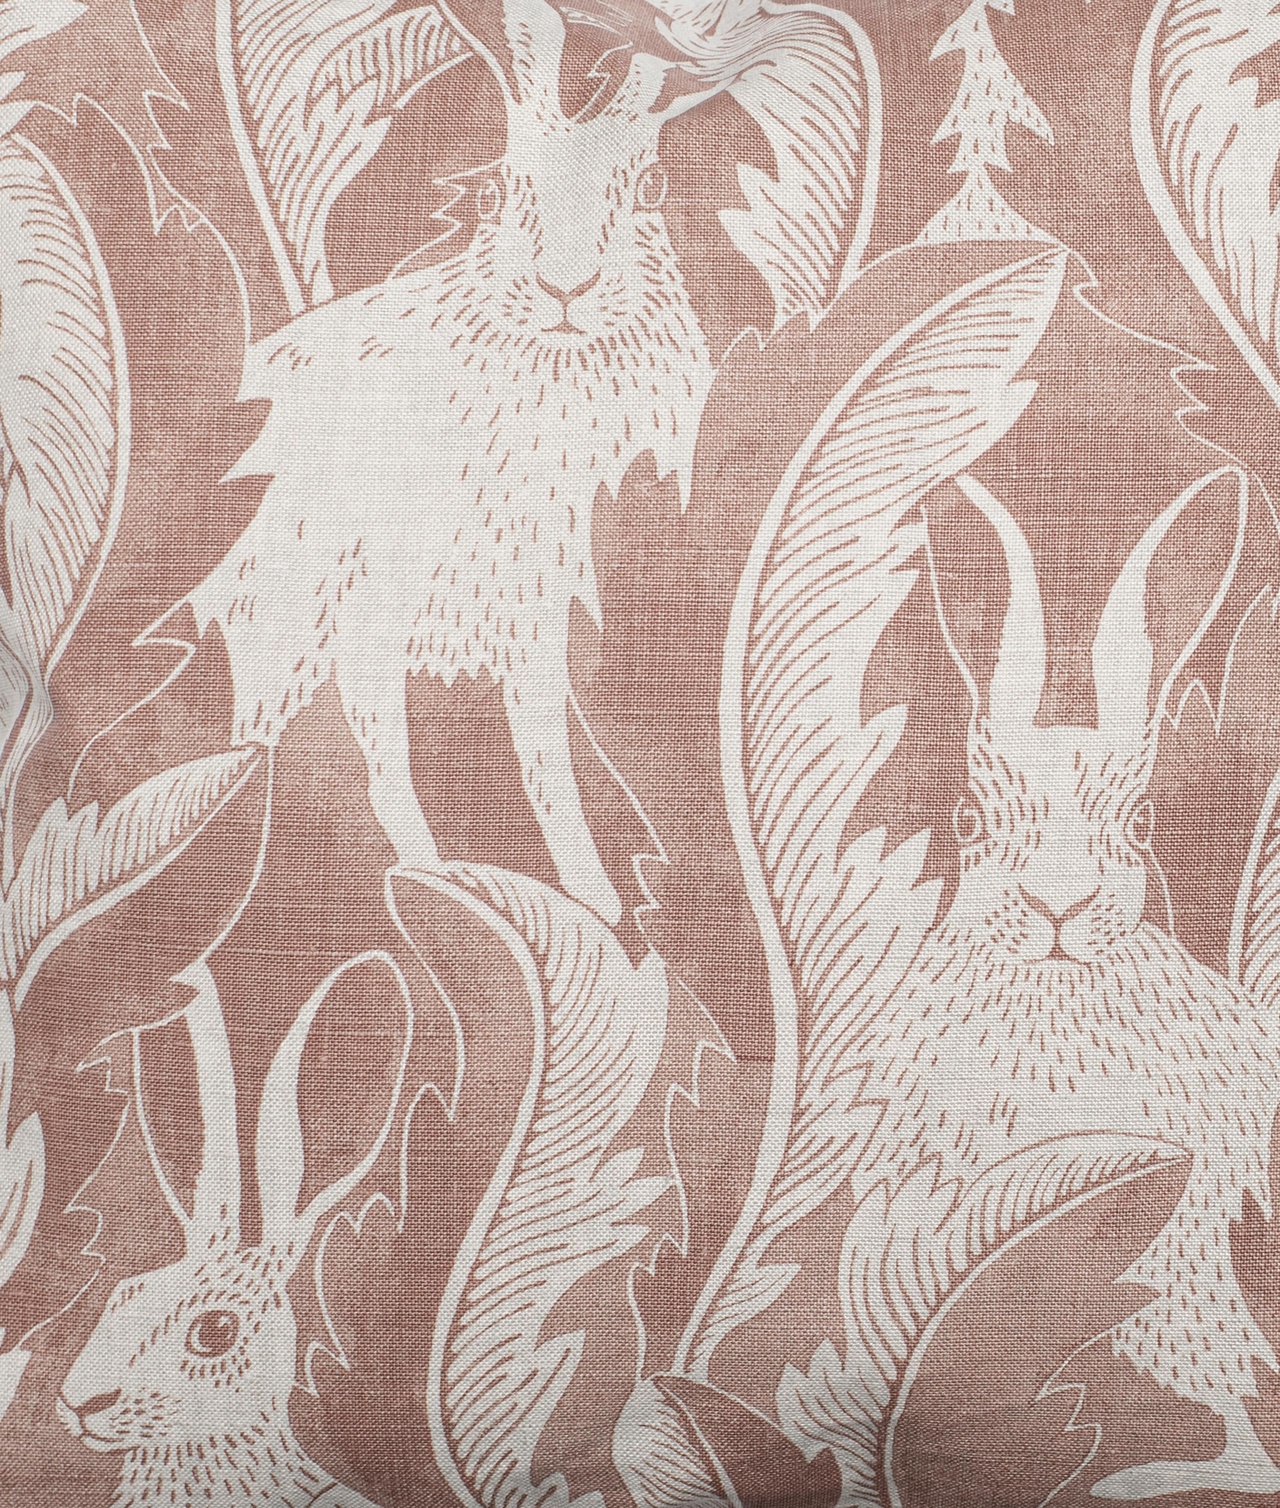 Fabric sample "Hares in hiding"